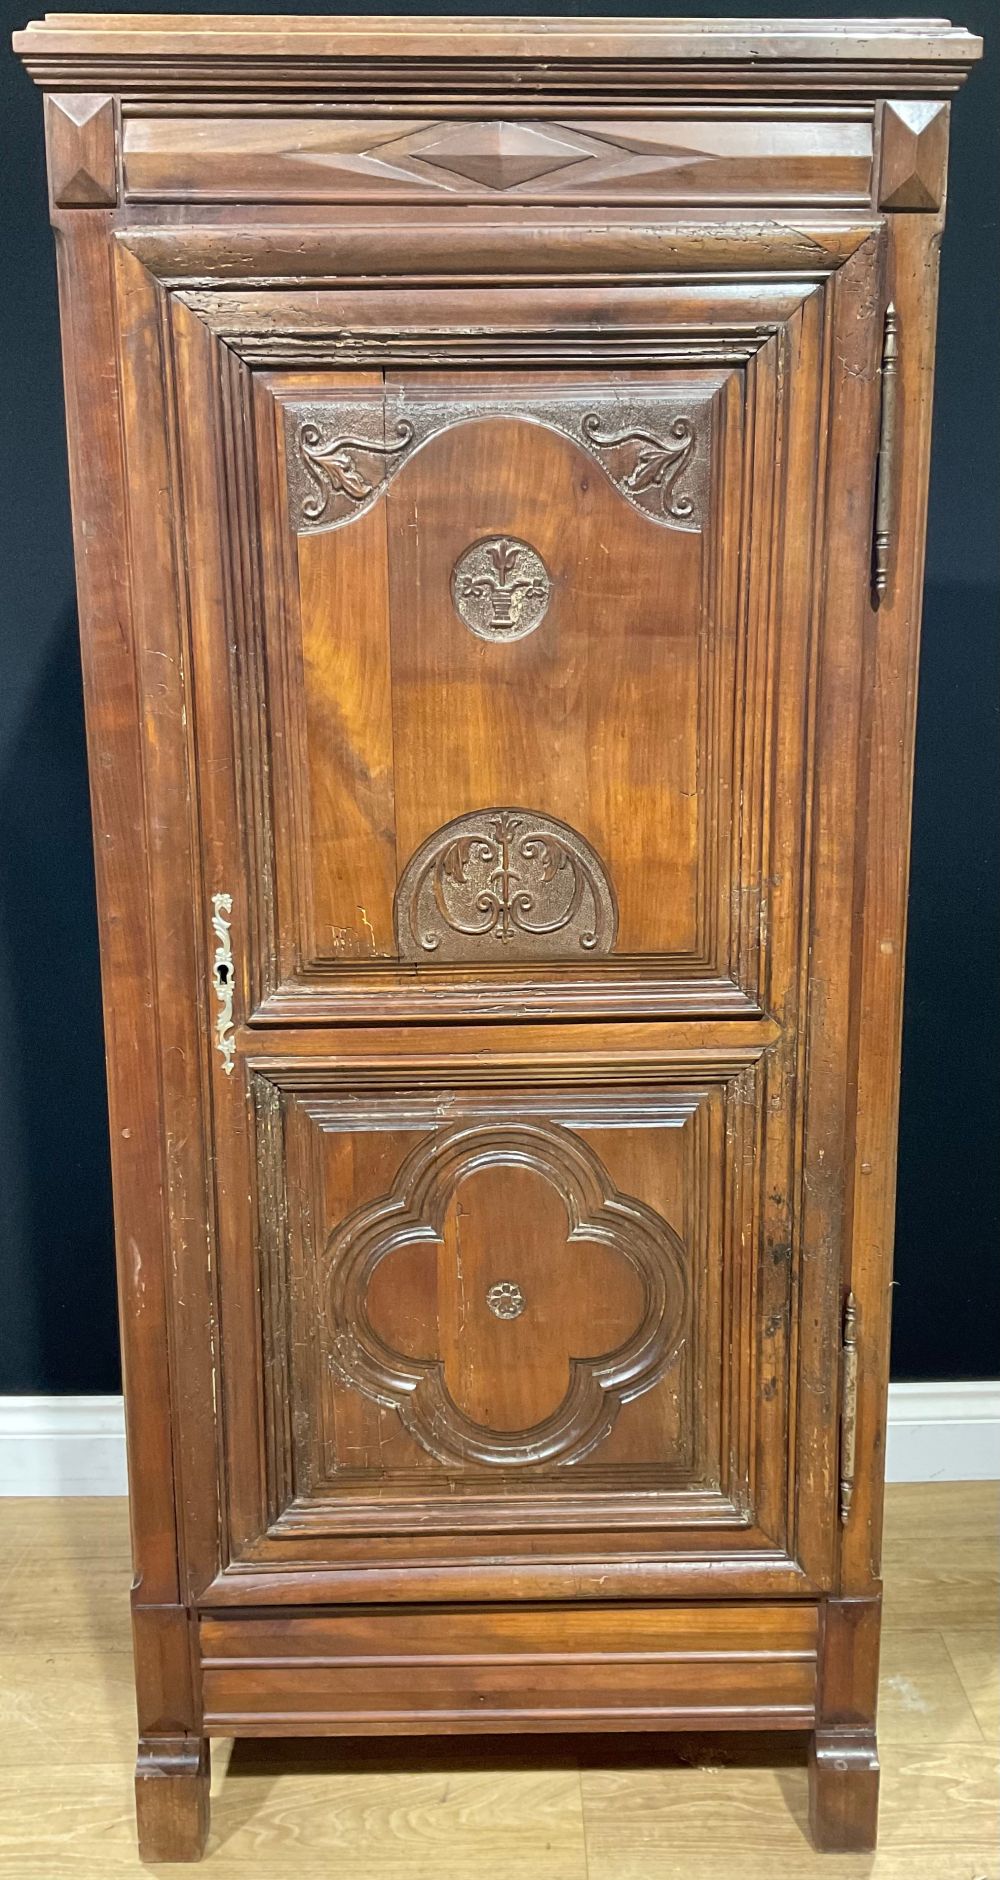 An 18th century style French Provincial provision cupboard, 149cm high, 67cm wide, 36.5cm deep